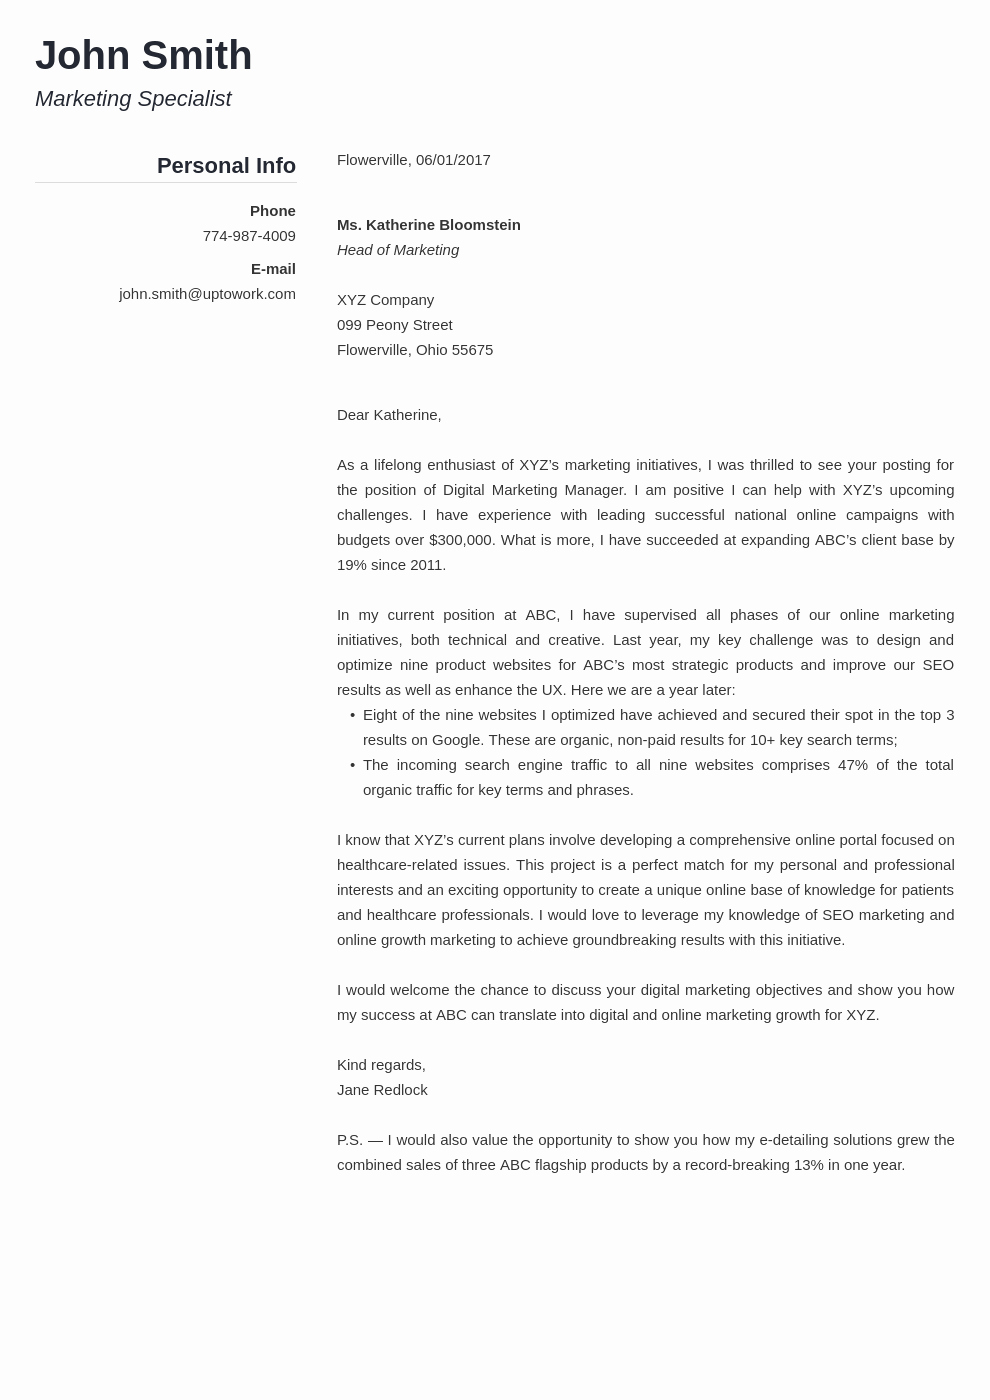 Sample Professional Cover Letter Unique 20 Cover Letter Templates Fill them In and Download In 5